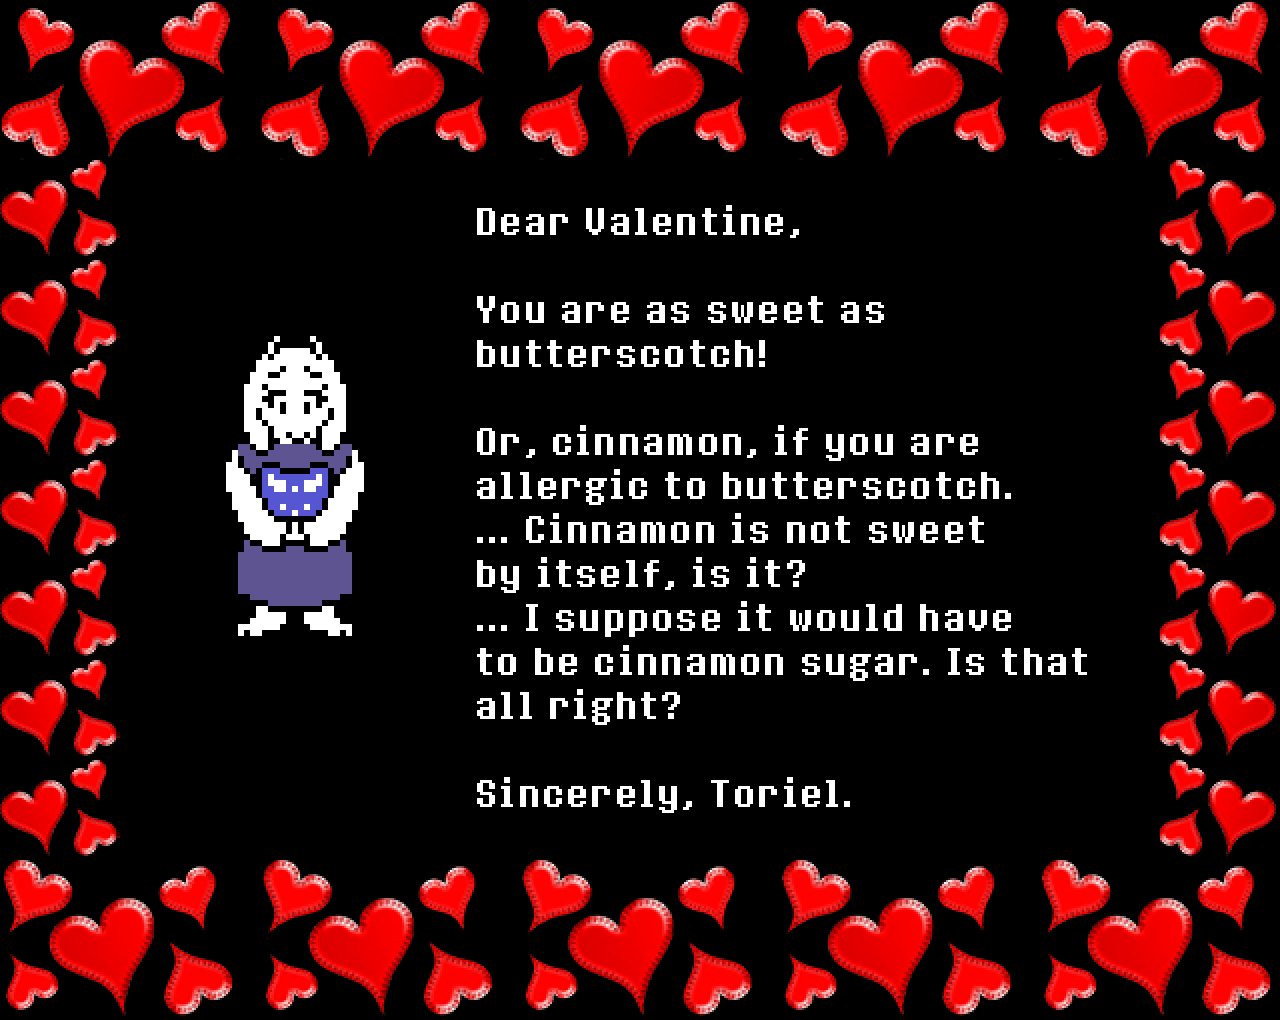 Toriel: Dear Valentine,

You are as sweet as butterscotch!

Or, cinnamon, if you are allergic to butterscotch.
… Cinnamon is not sweet by itself, is it?
… I suppose it would have to be cinnamon sugar. Is that all right?

Sincerely, Toriel.